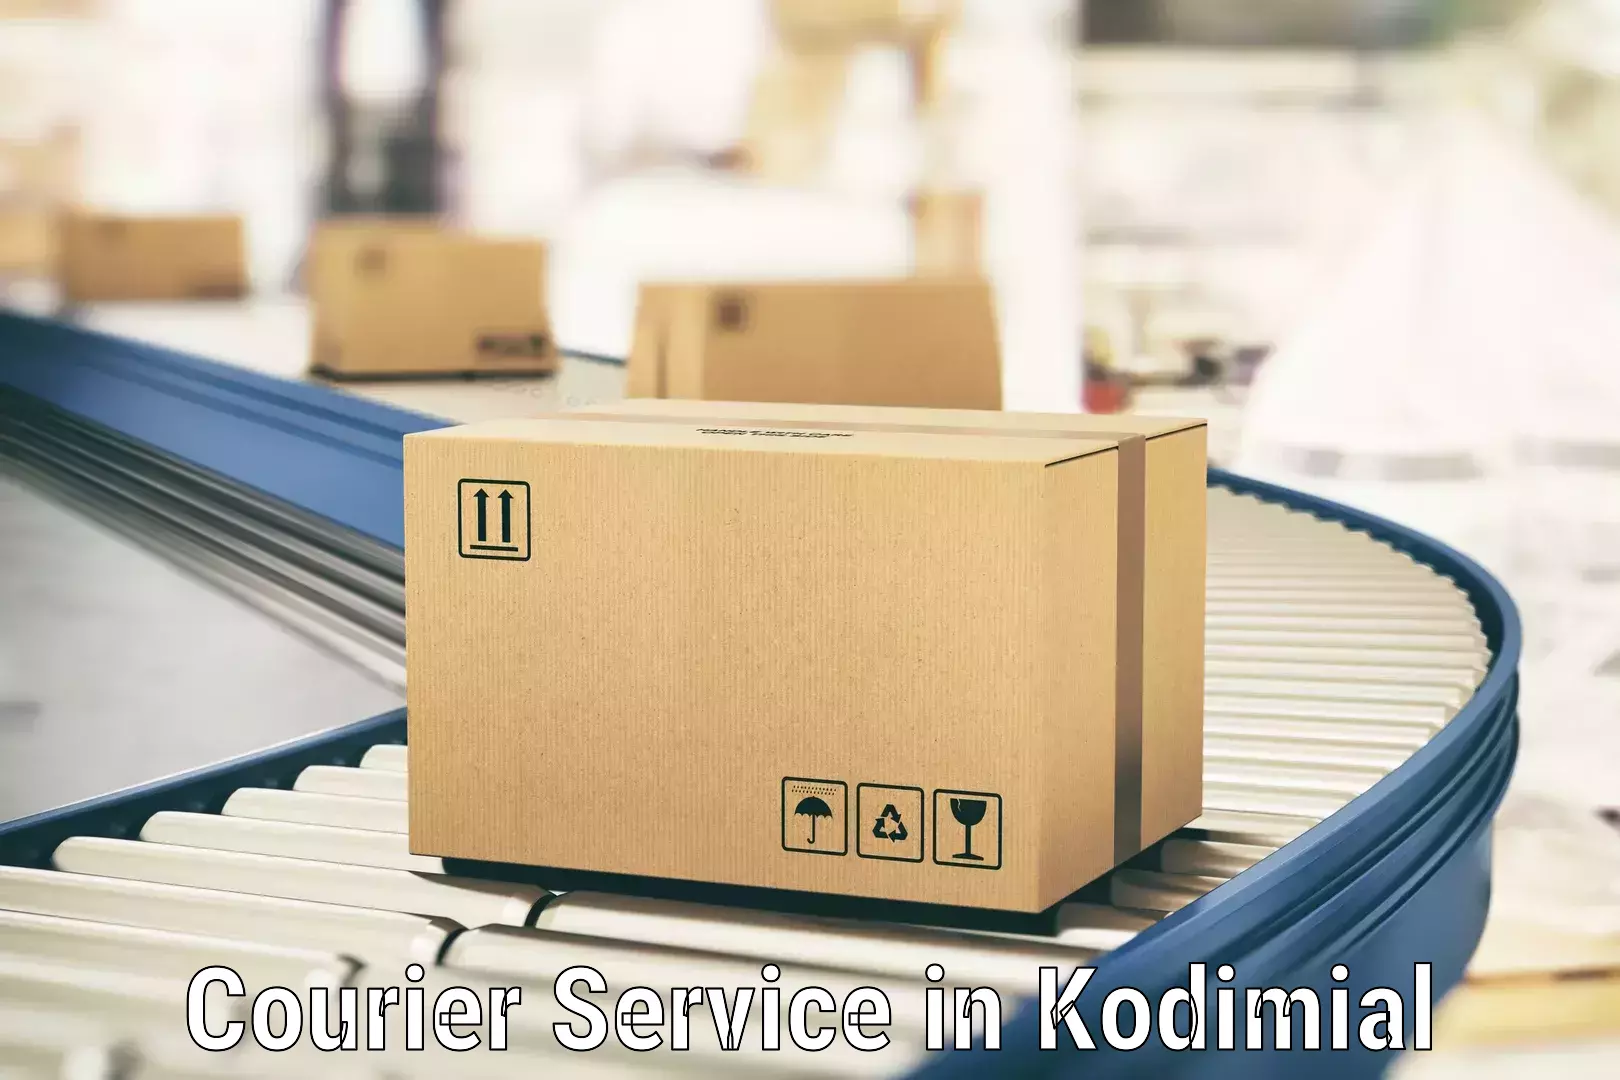 Sustainable delivery practices in Kodimial